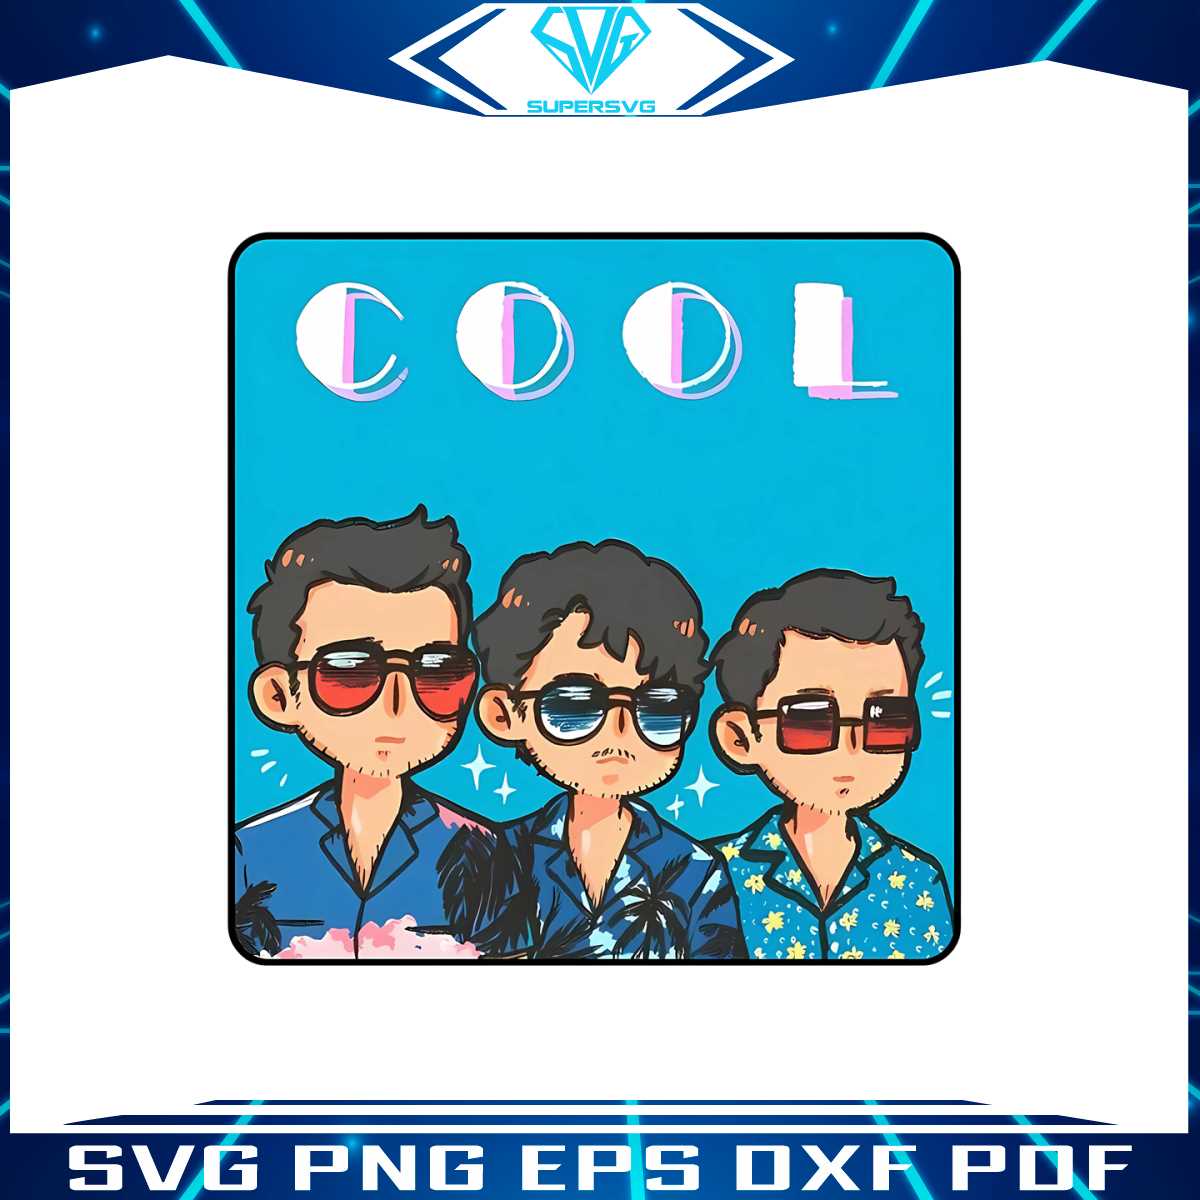 cool-jonas-brothers-the-tour-2023-png-download-file